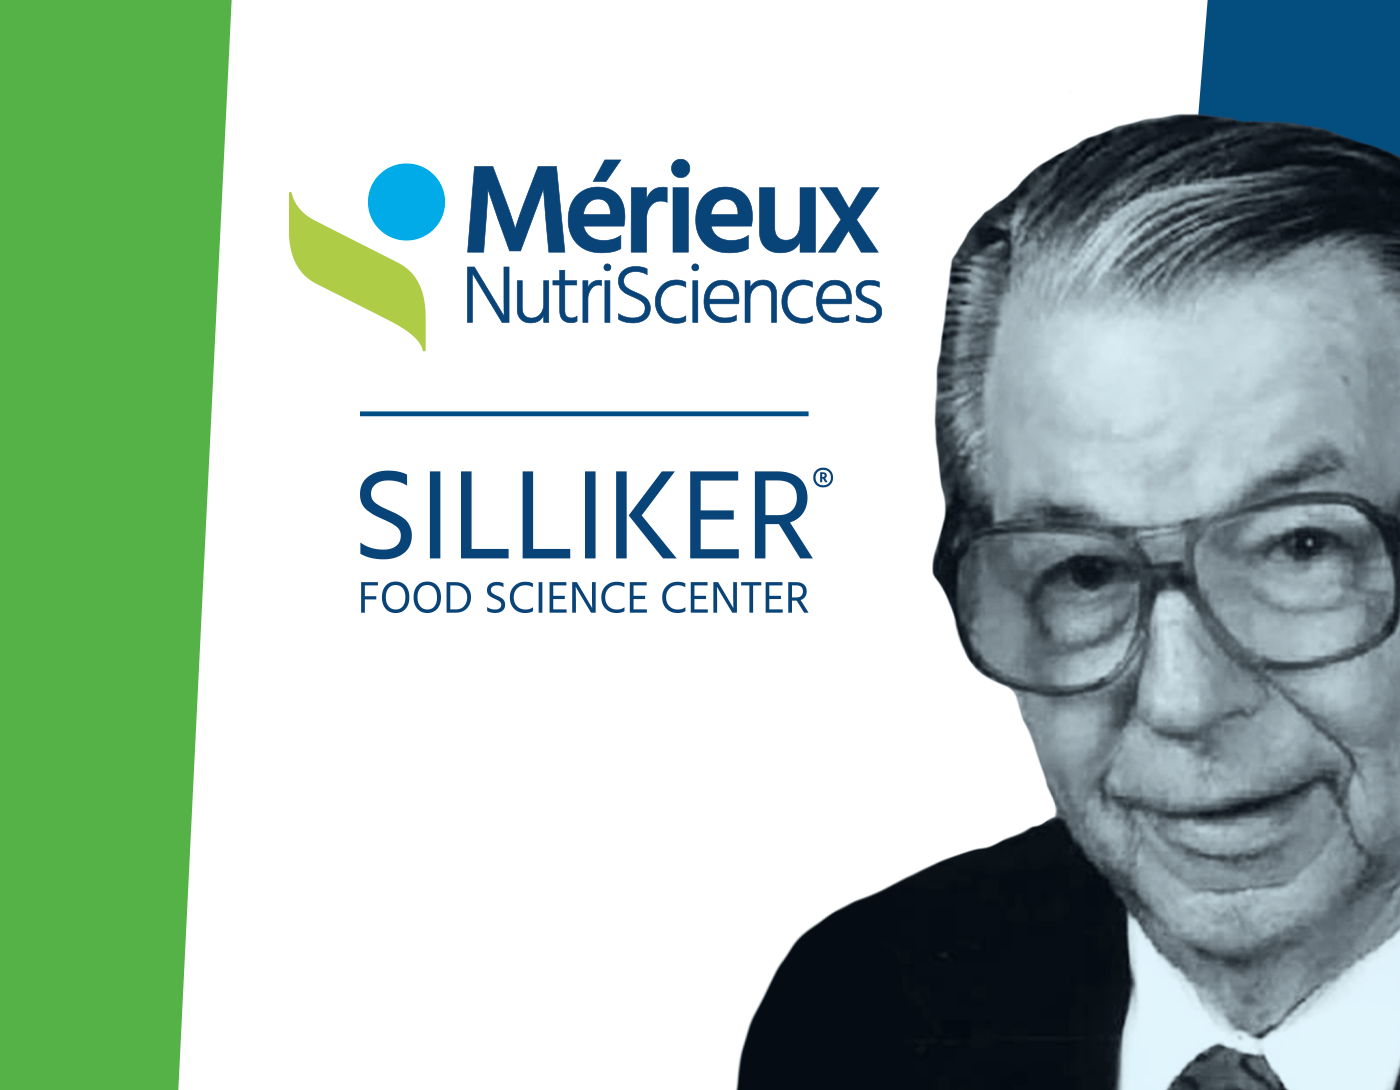 Introducing the Silliker® Food Science Center